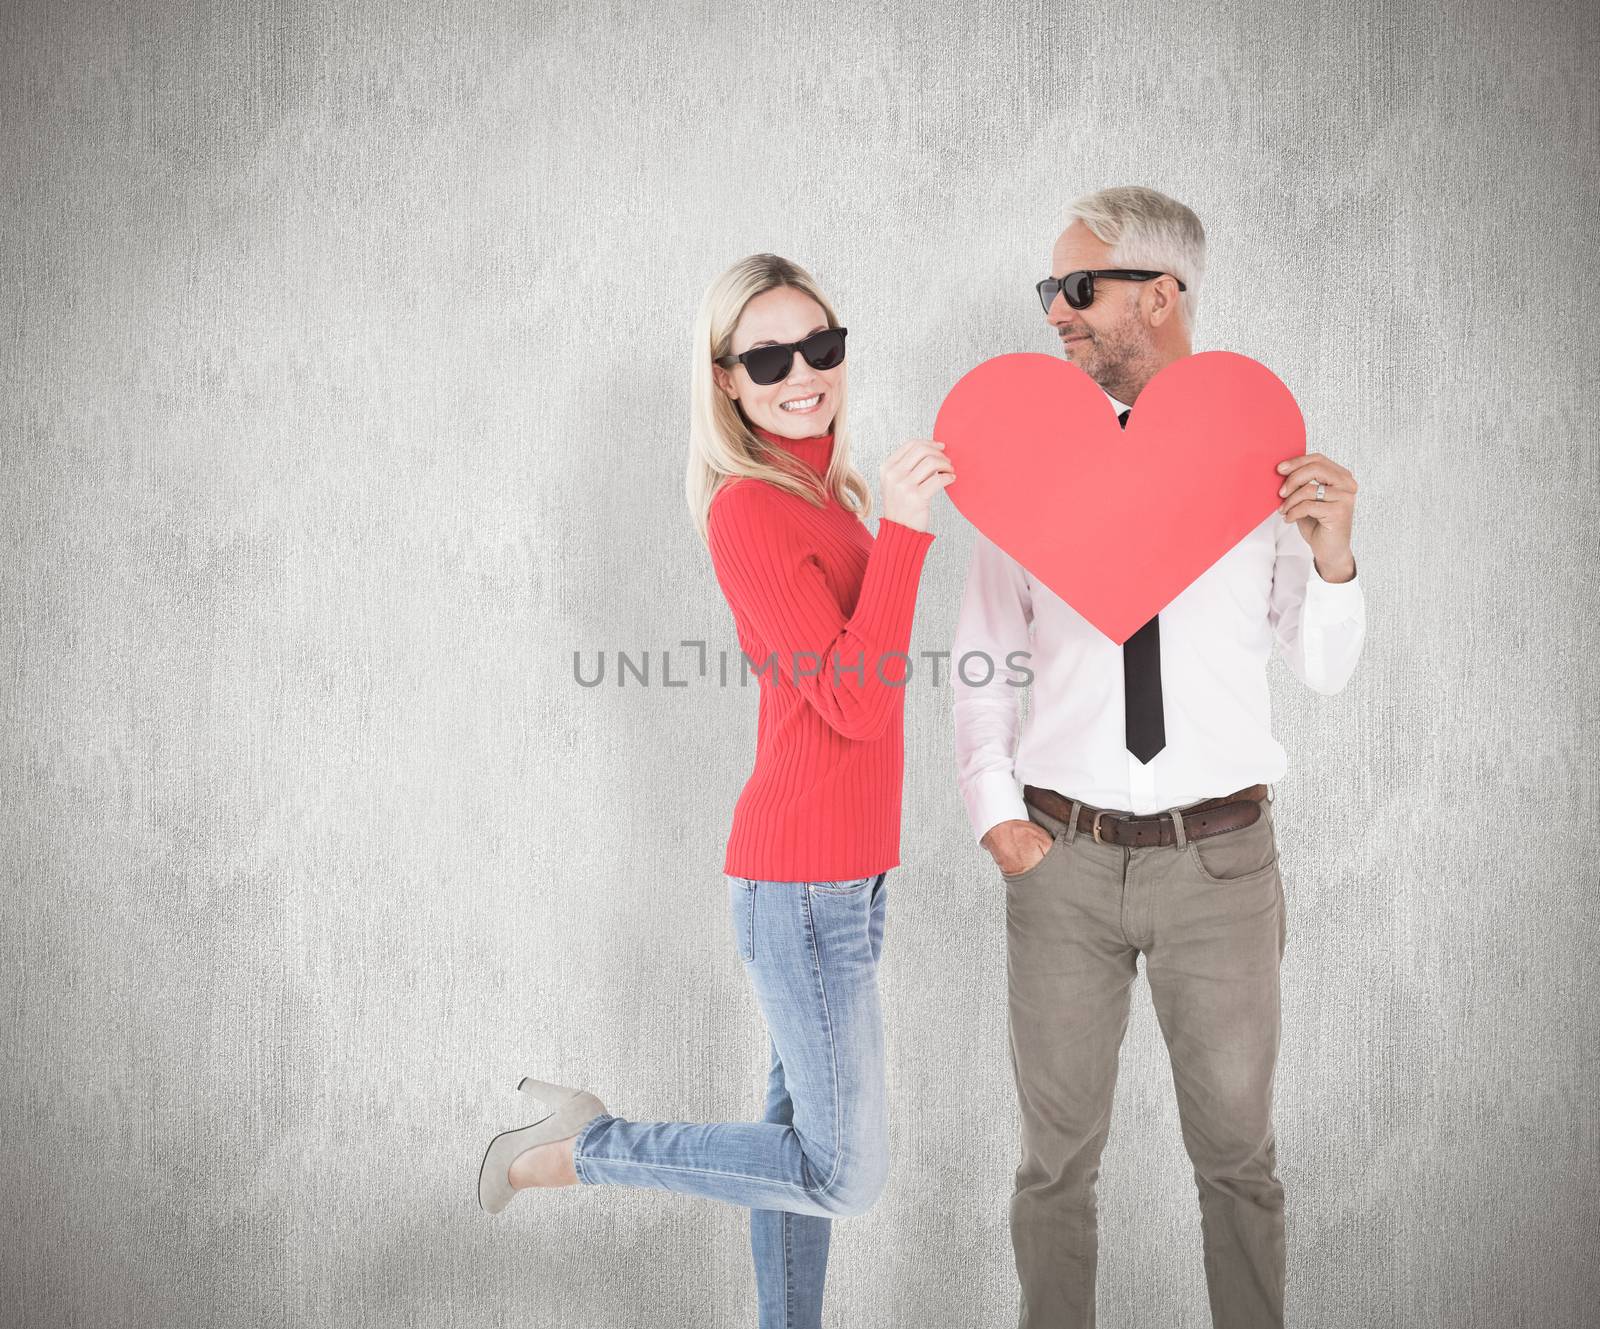 Cool couple holding a red heart together against weathered surface 